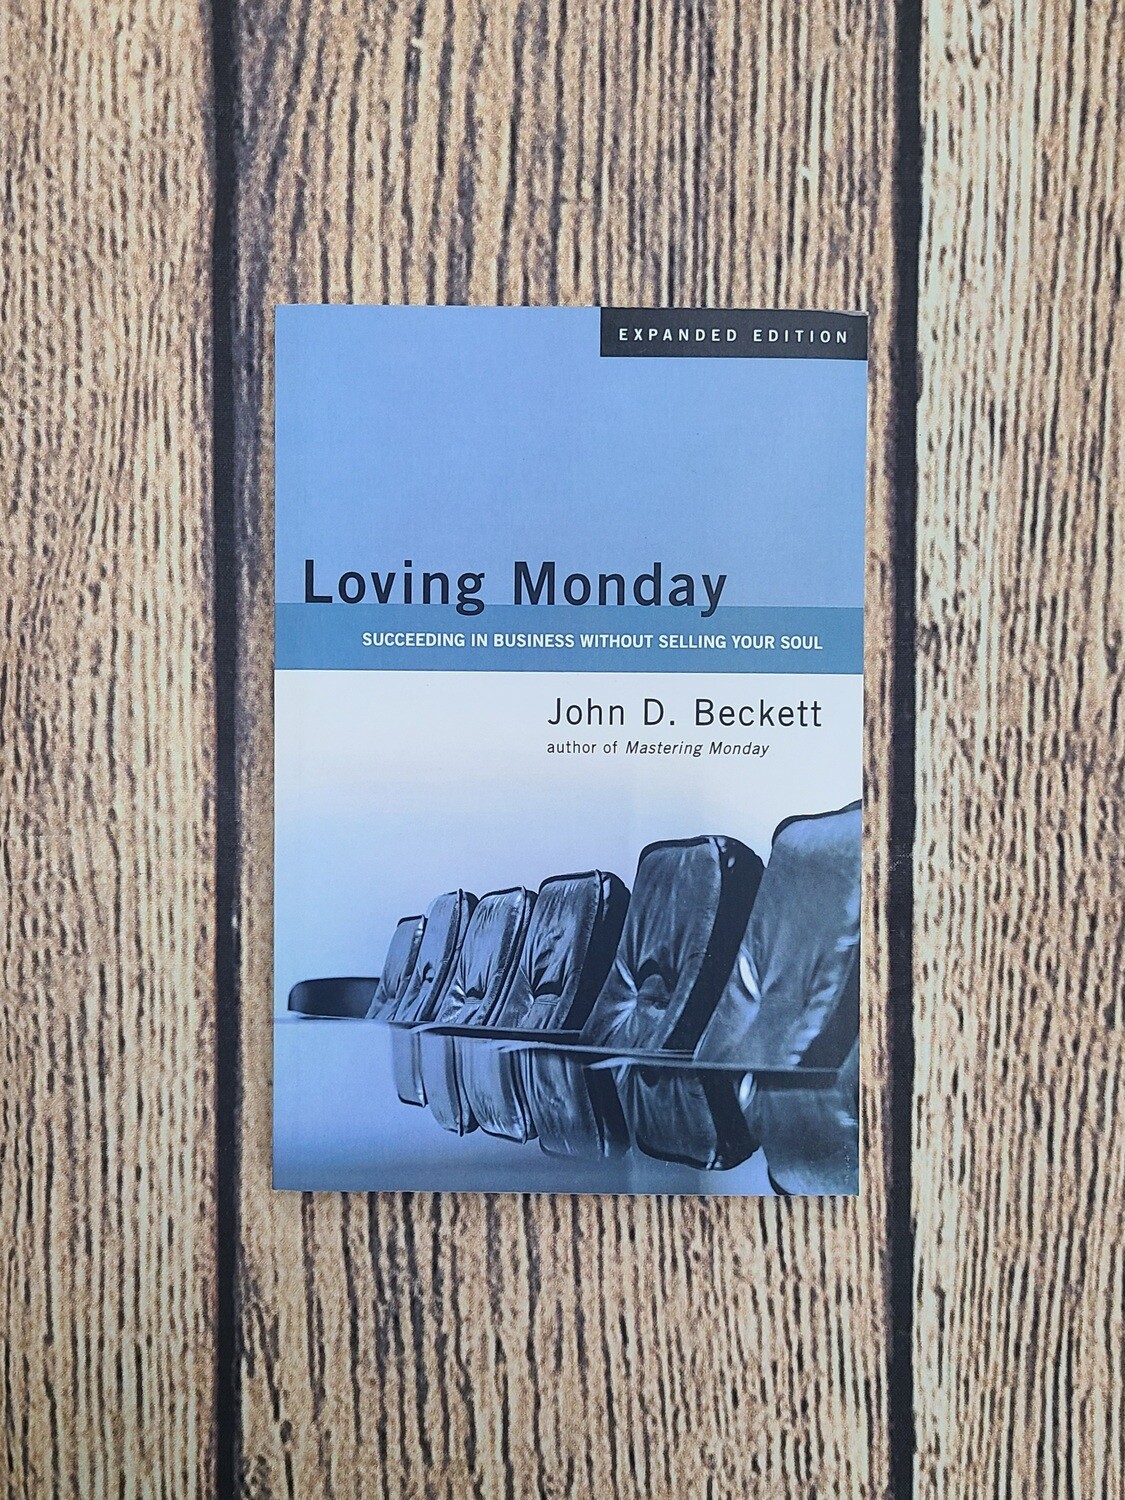 Loving Monday: Succeeding in Business Without Selling Your Soul by John D. Beckett